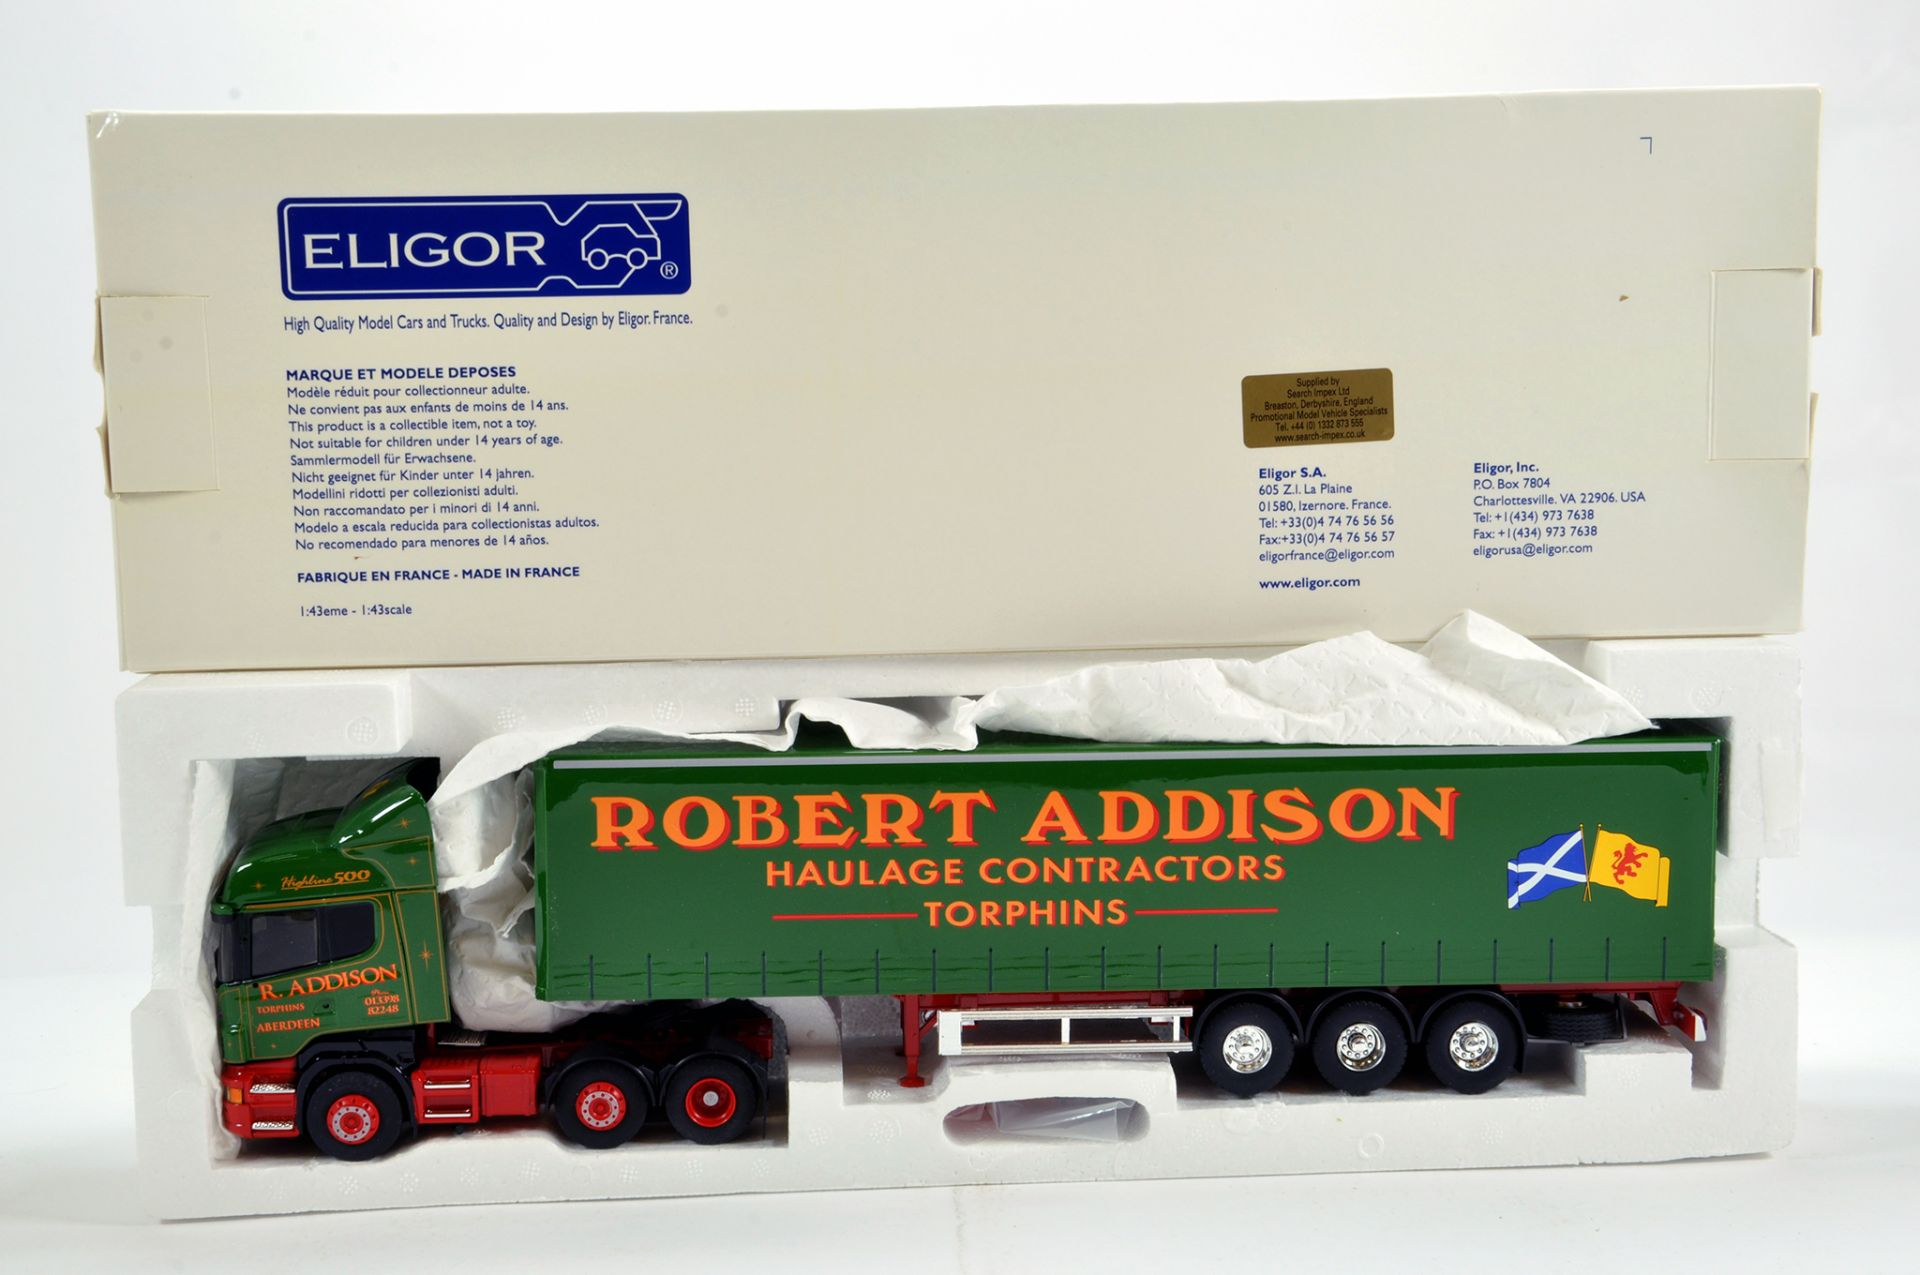 Eligor 1/43 Diecast Truck Issue Comprising Scania Curtain Trailer in Livery of Robert Addison.